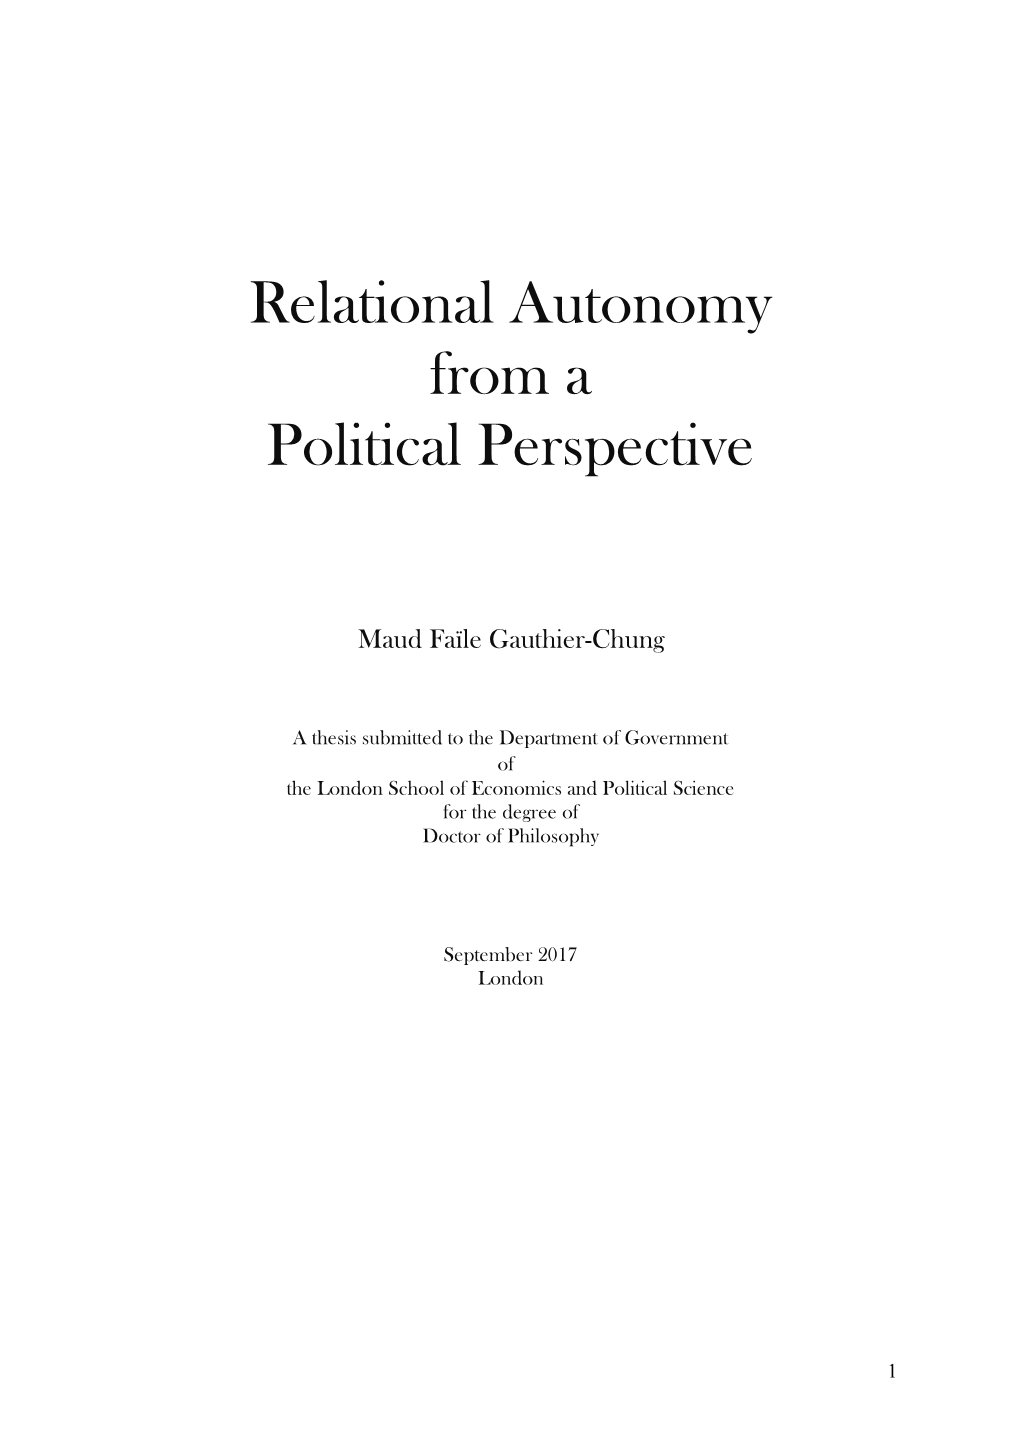 Relational Autonomy from a Political Perspective